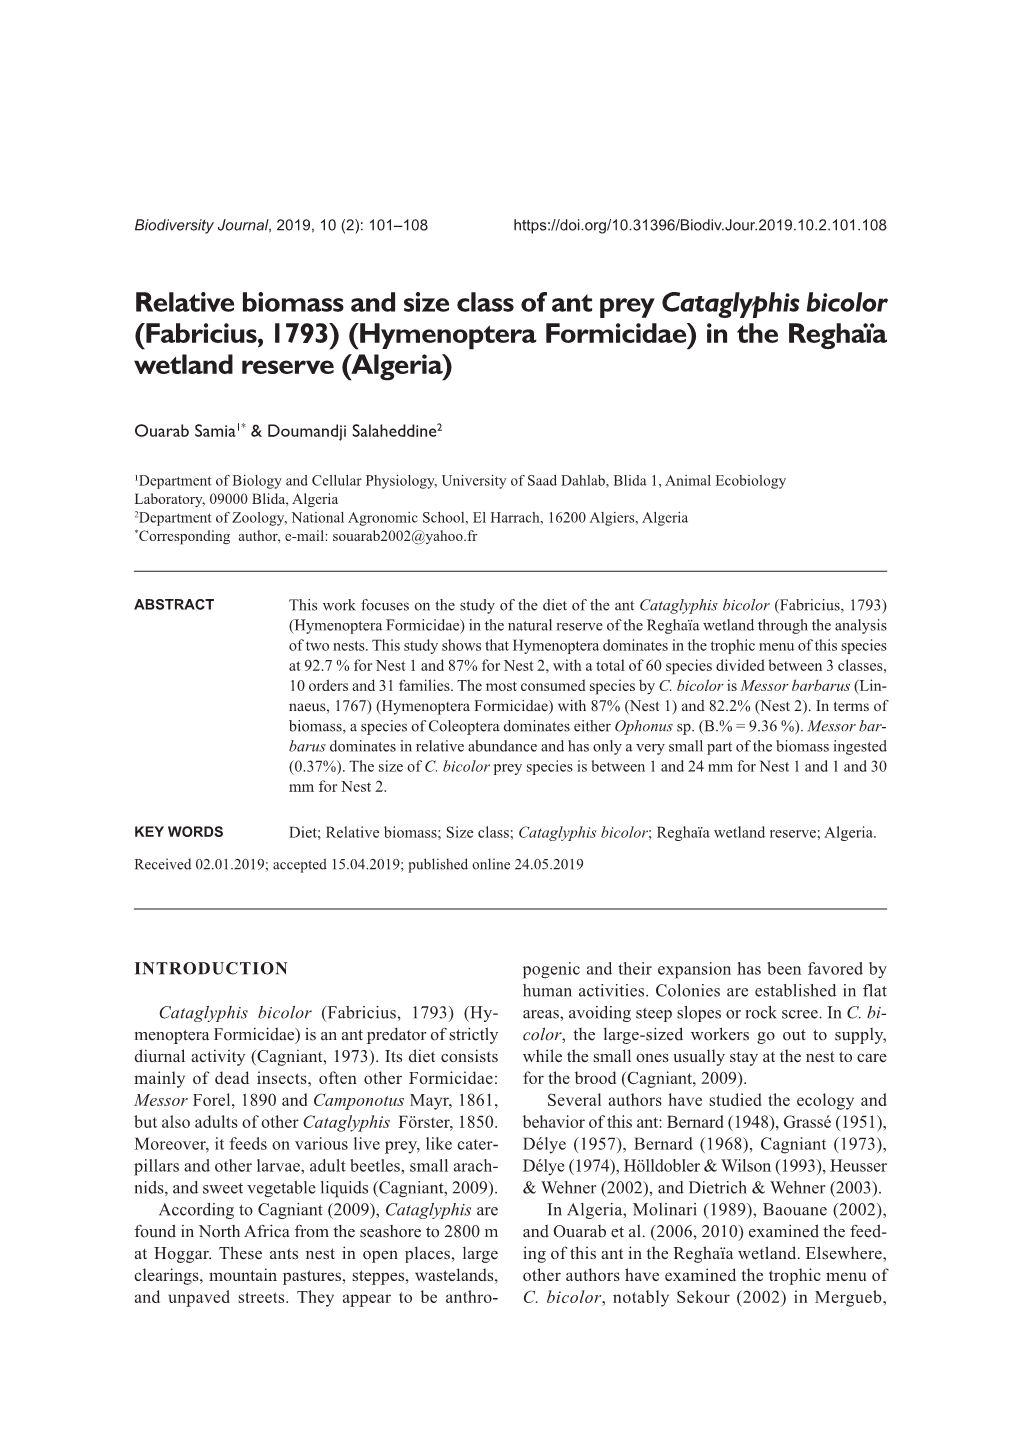 Relative Biomass and Size Class of Ant Prey Cataglyphis Bicolor (Fabricius, 1793) (Hymenoptera Formicidae) in the Reghaïa Wetland Reserve (Algeria)